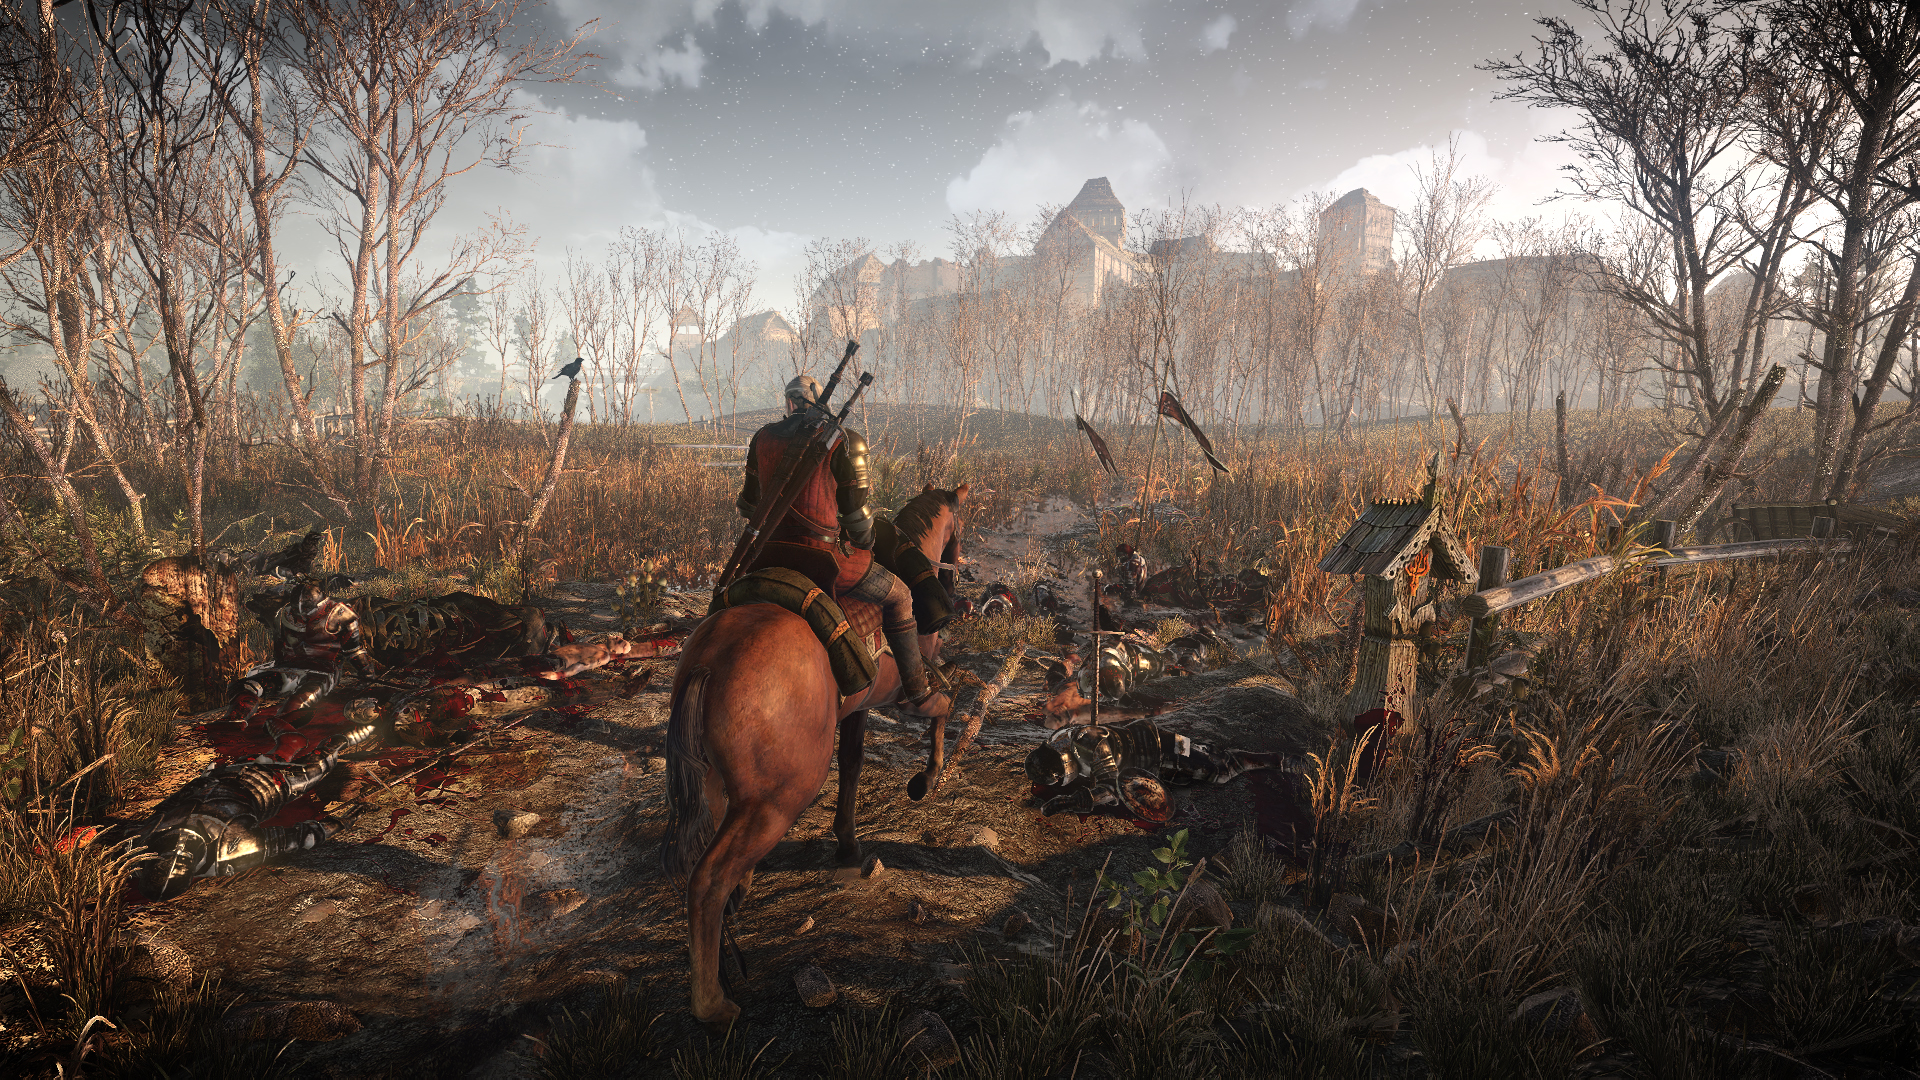 WATCH: ‘The Witcher 3’ Gameplay Running at 60 FPS | Heavy.com